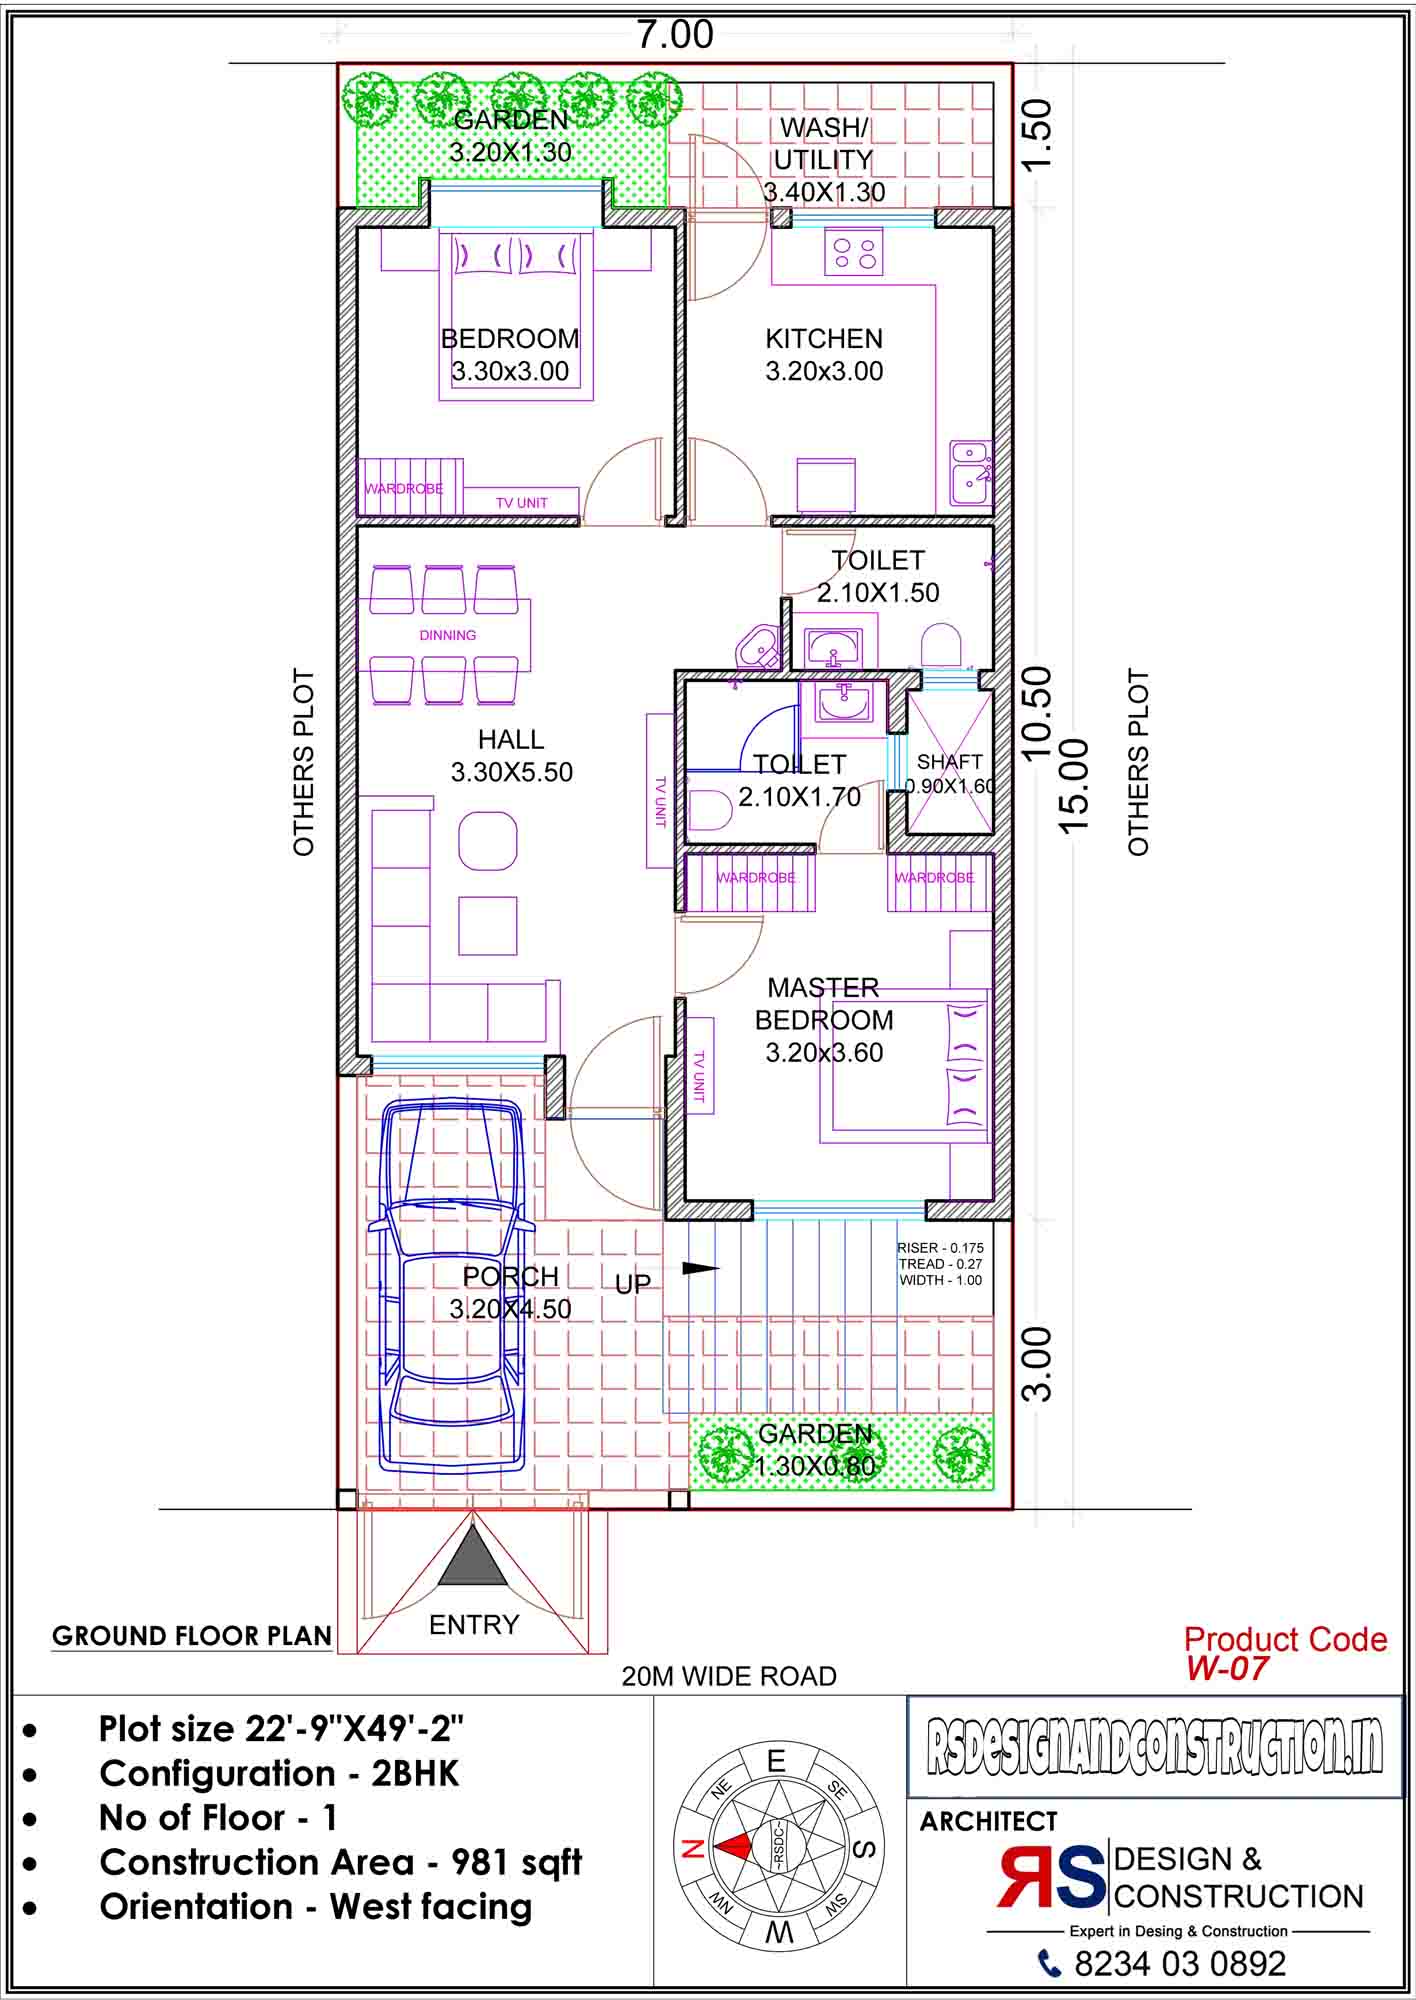 2bhk house plan with Plot size 22'x49' west-facing | RSDC ...